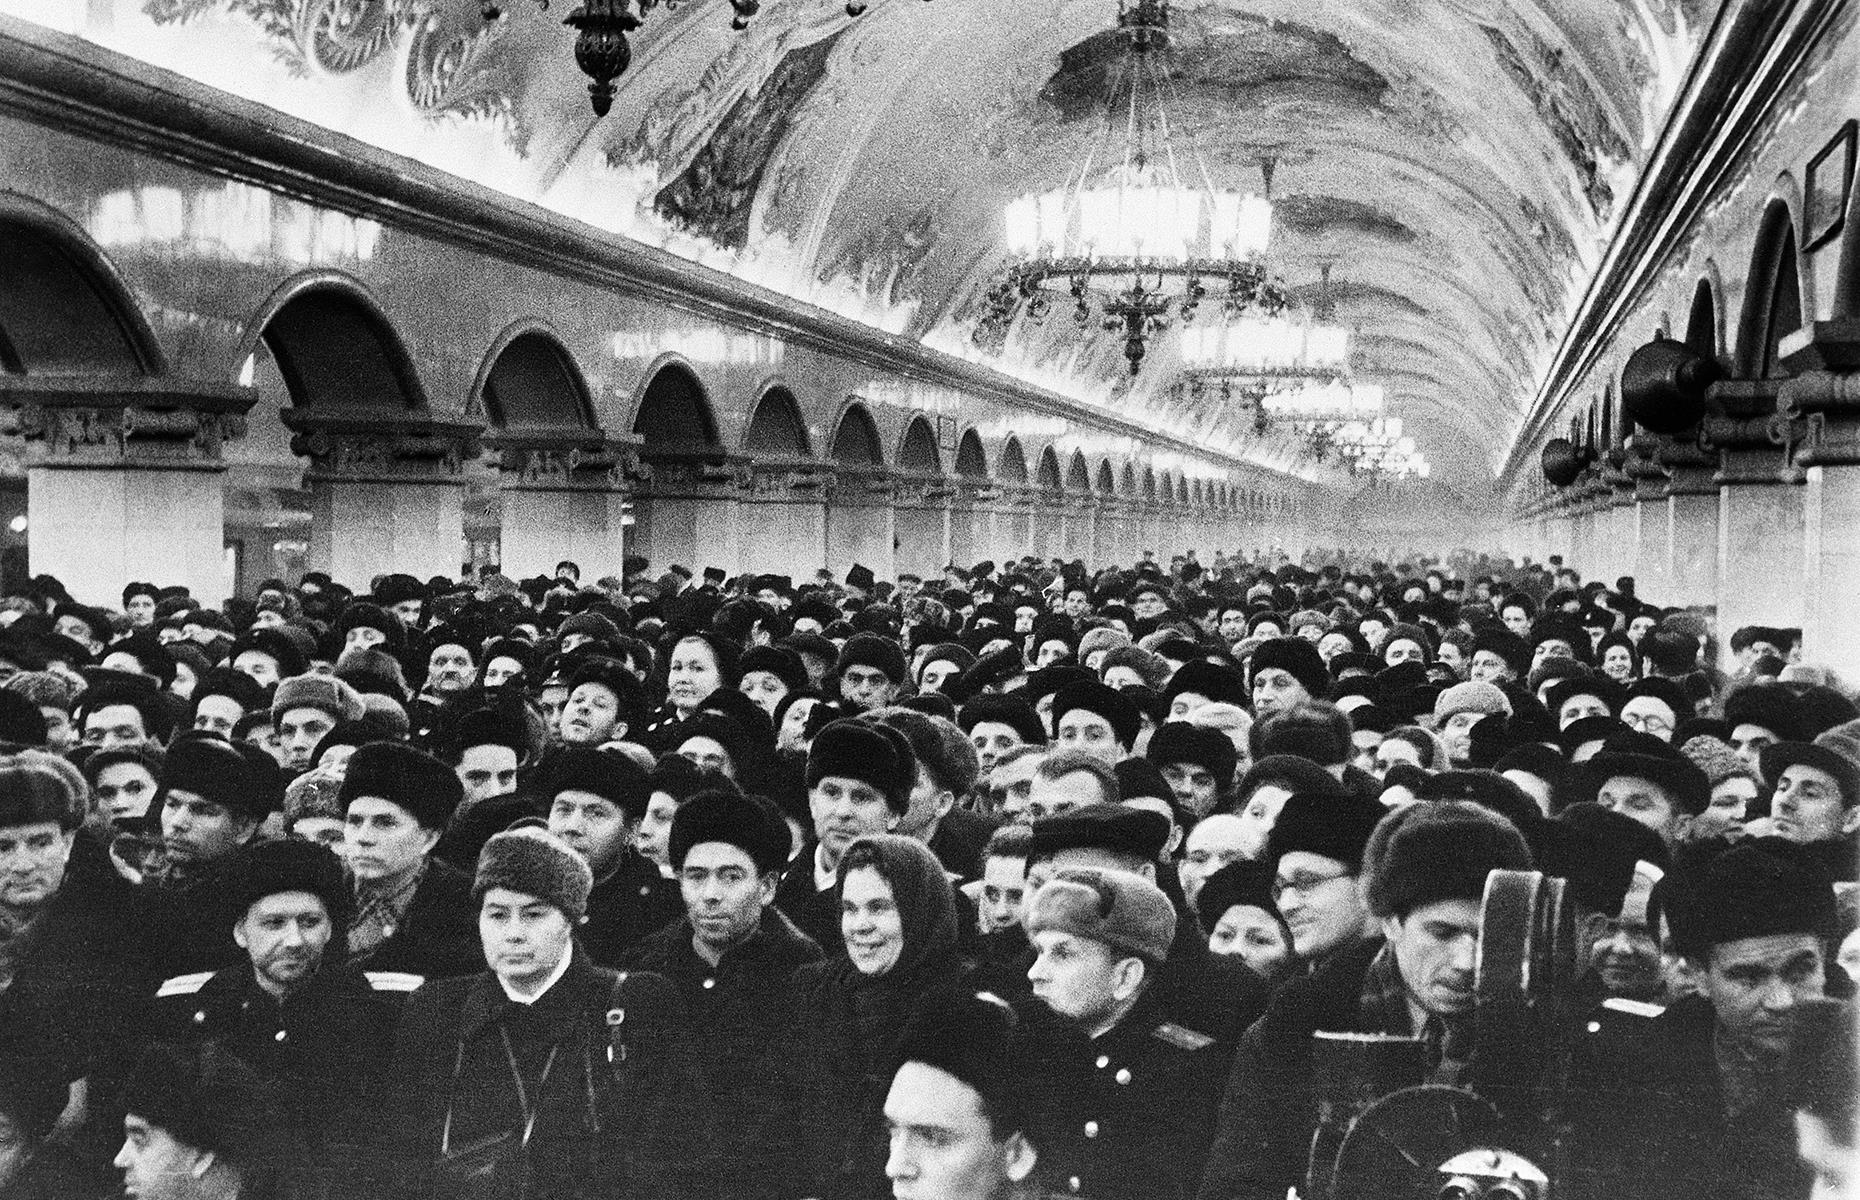 By the time this photo was taken, the Moscow Metro had been up and running for almost two decades. Here crowds gather at Komsomolskaya station in 1952 to celebrate the opening of a brand new section. In true Moscow style, the glittering station has intricate ceiling friezes, bold columns and arches, and chandeliers.